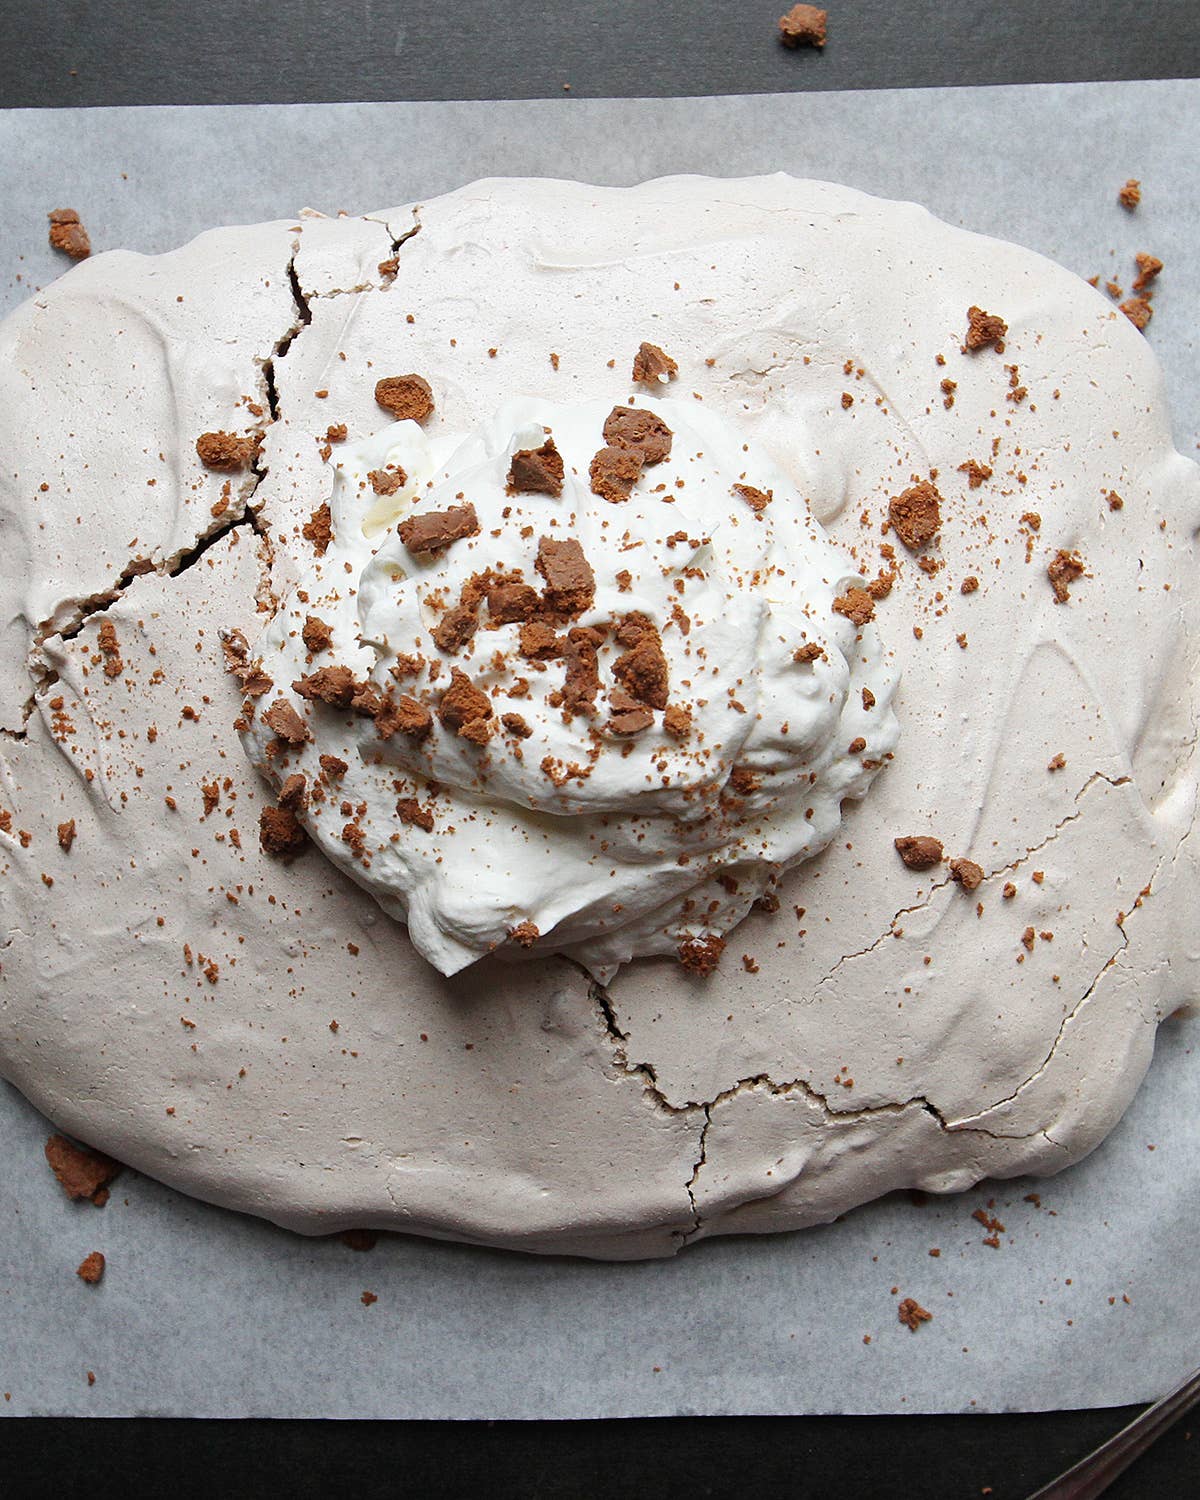 17 Meringue Recipes for When You Have an Abundance of Egg Whites